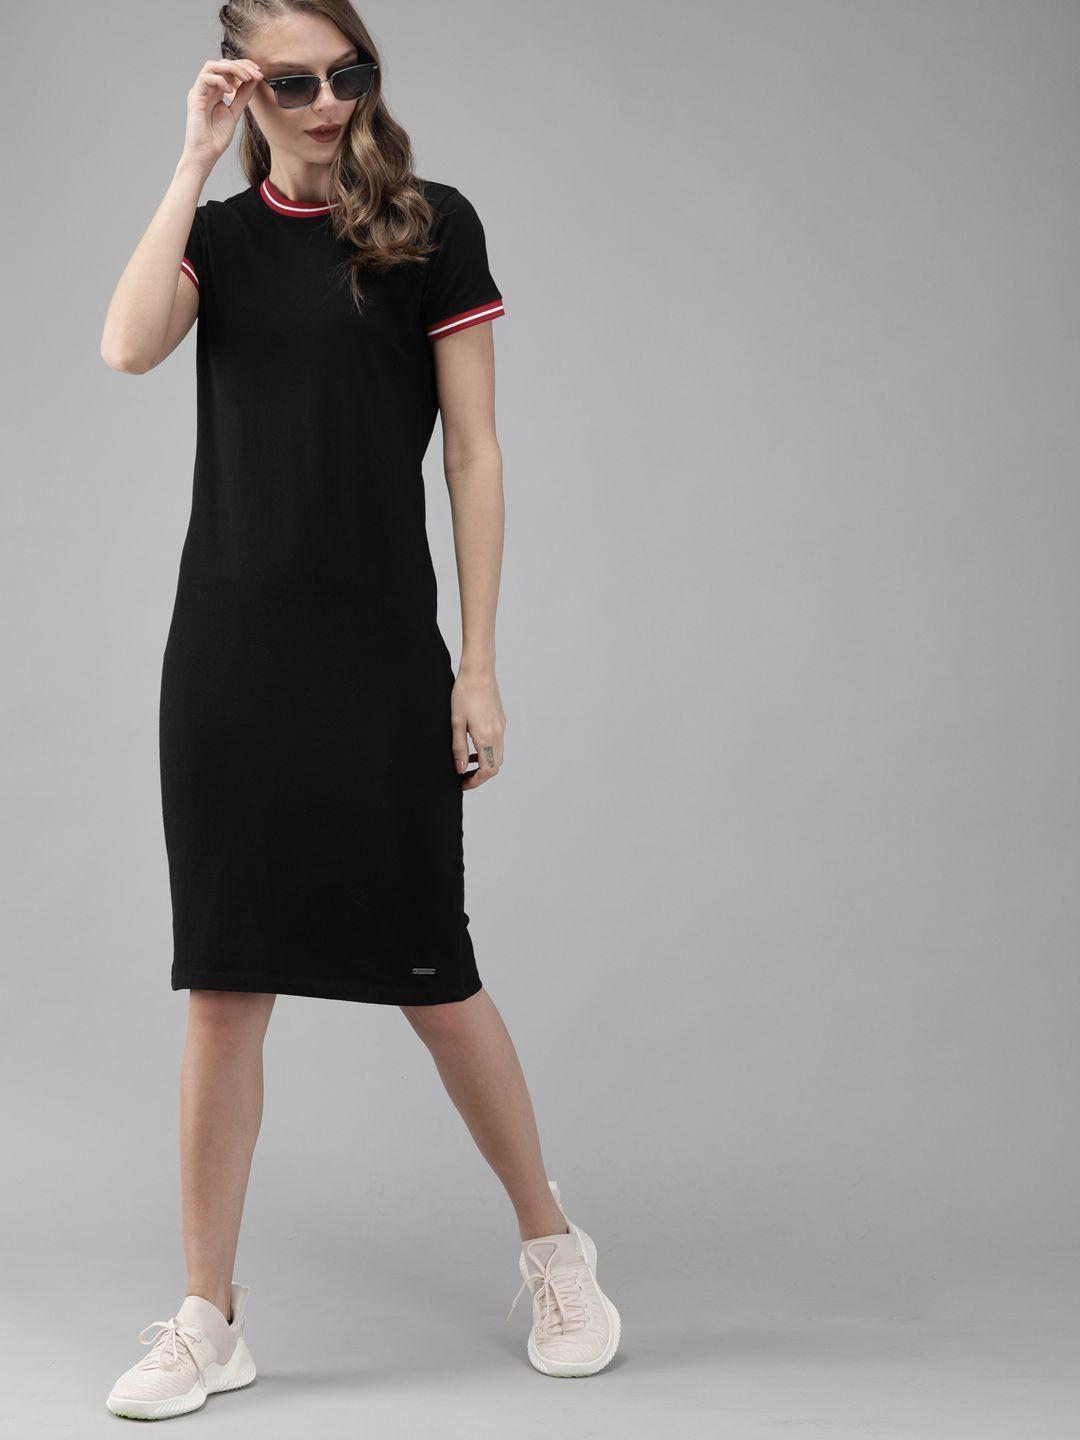 the roadster lifestyle co women black solid t-shirt dress